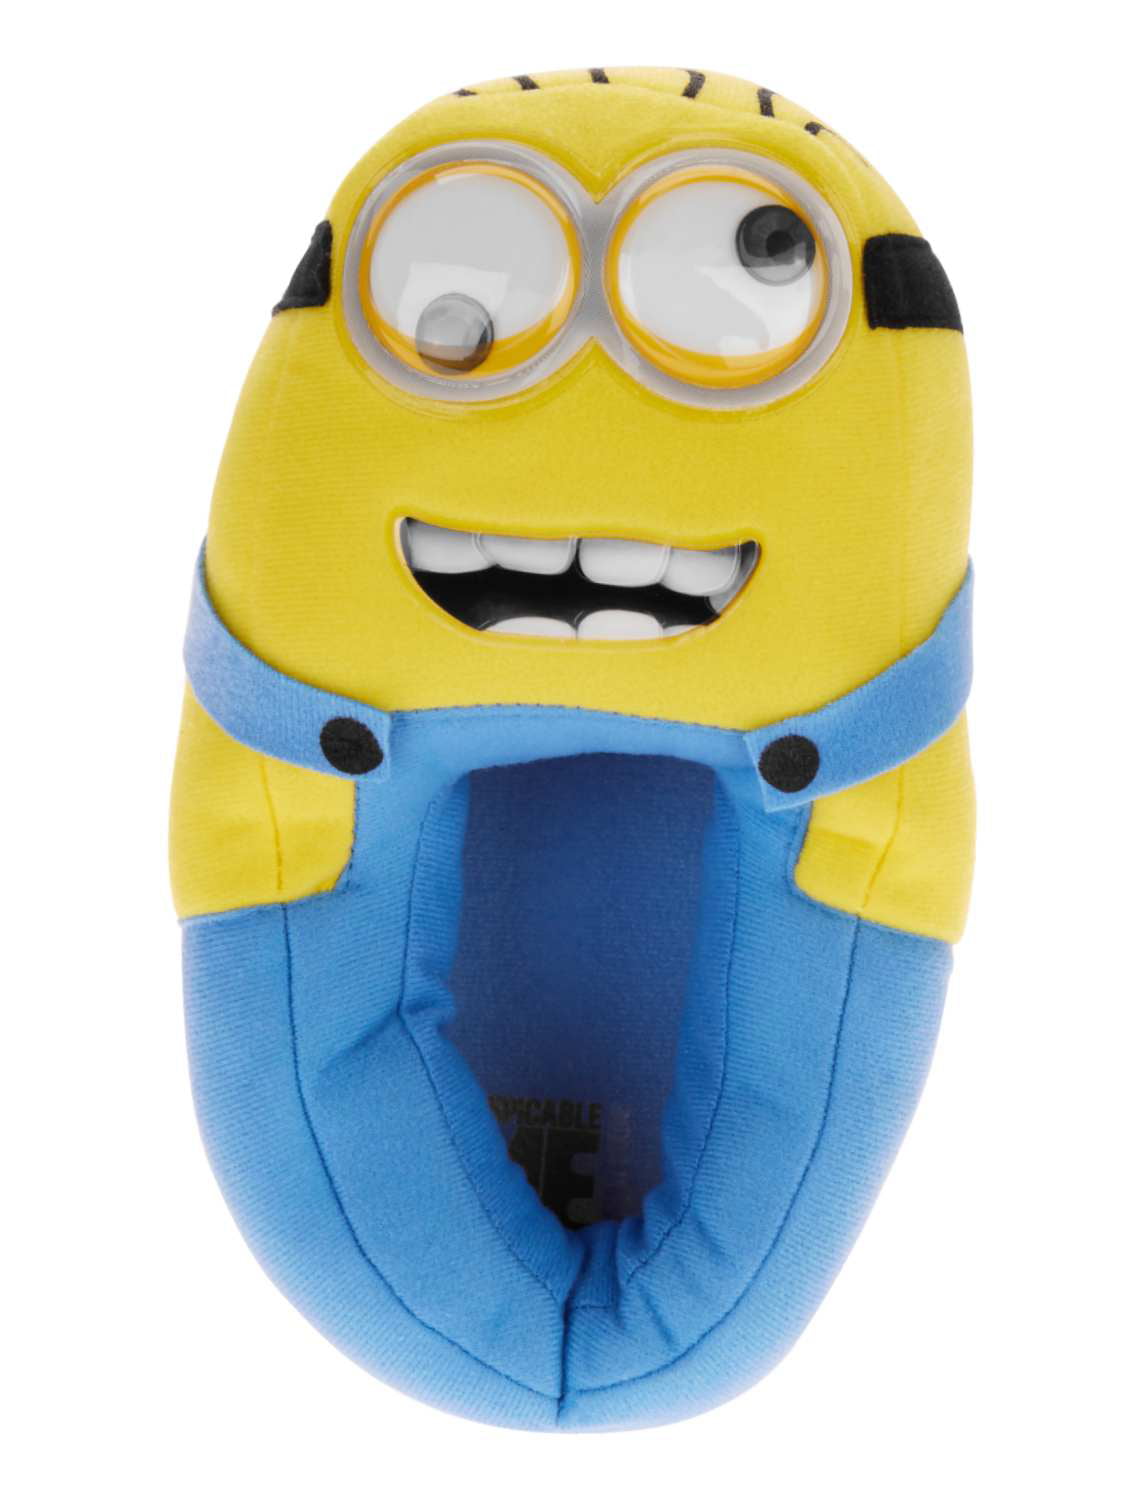 HALF PRICE SALE Boys Minions Slippers Despicable Me 3D Novelty Mules Booties 